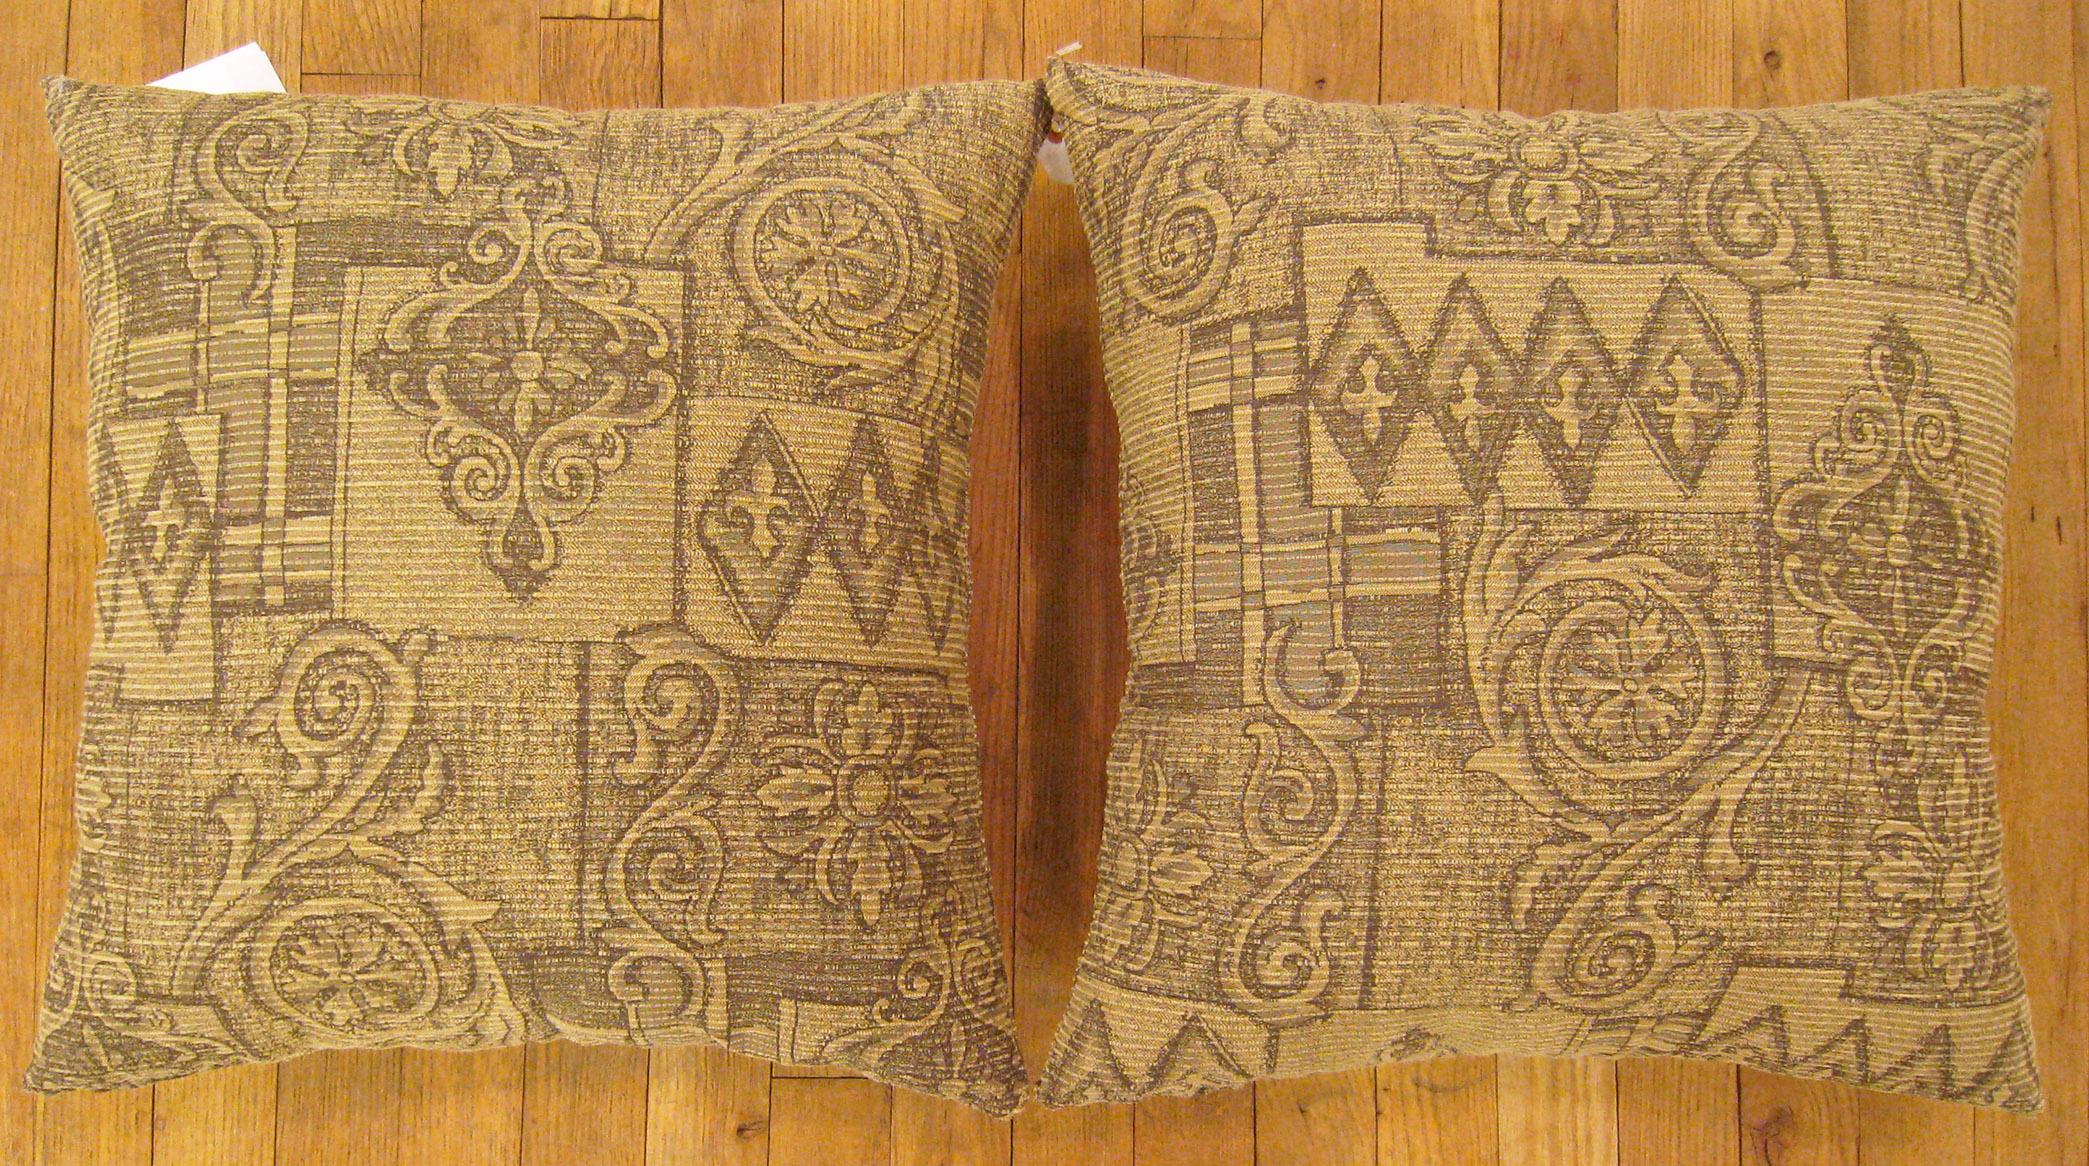 A Pair of Vintage Floro-geometric Fabric Pillows ; size 1'8” x 1'6” Each.

A vintage american pillows with geometric abstracts in a beige central field, size 1'8” x 1'6” each. This lovely decorative pillow features a vintage fabric of a American